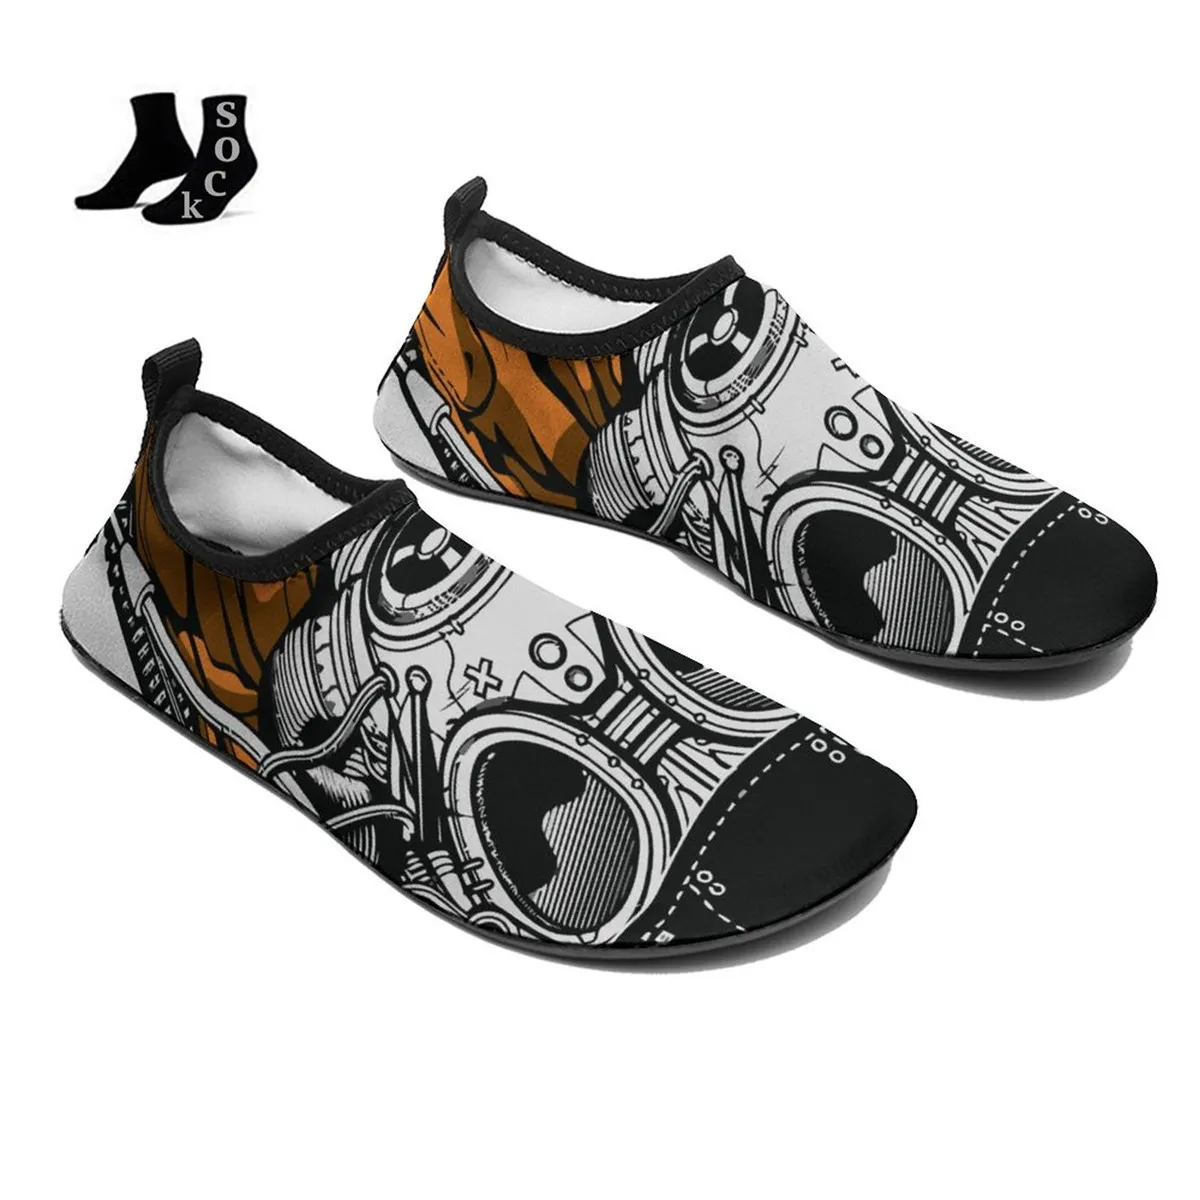 2022 new canvas skate shoes custom hand-painted fashion trend avant-garde men's and women's low-top board shoes YY8